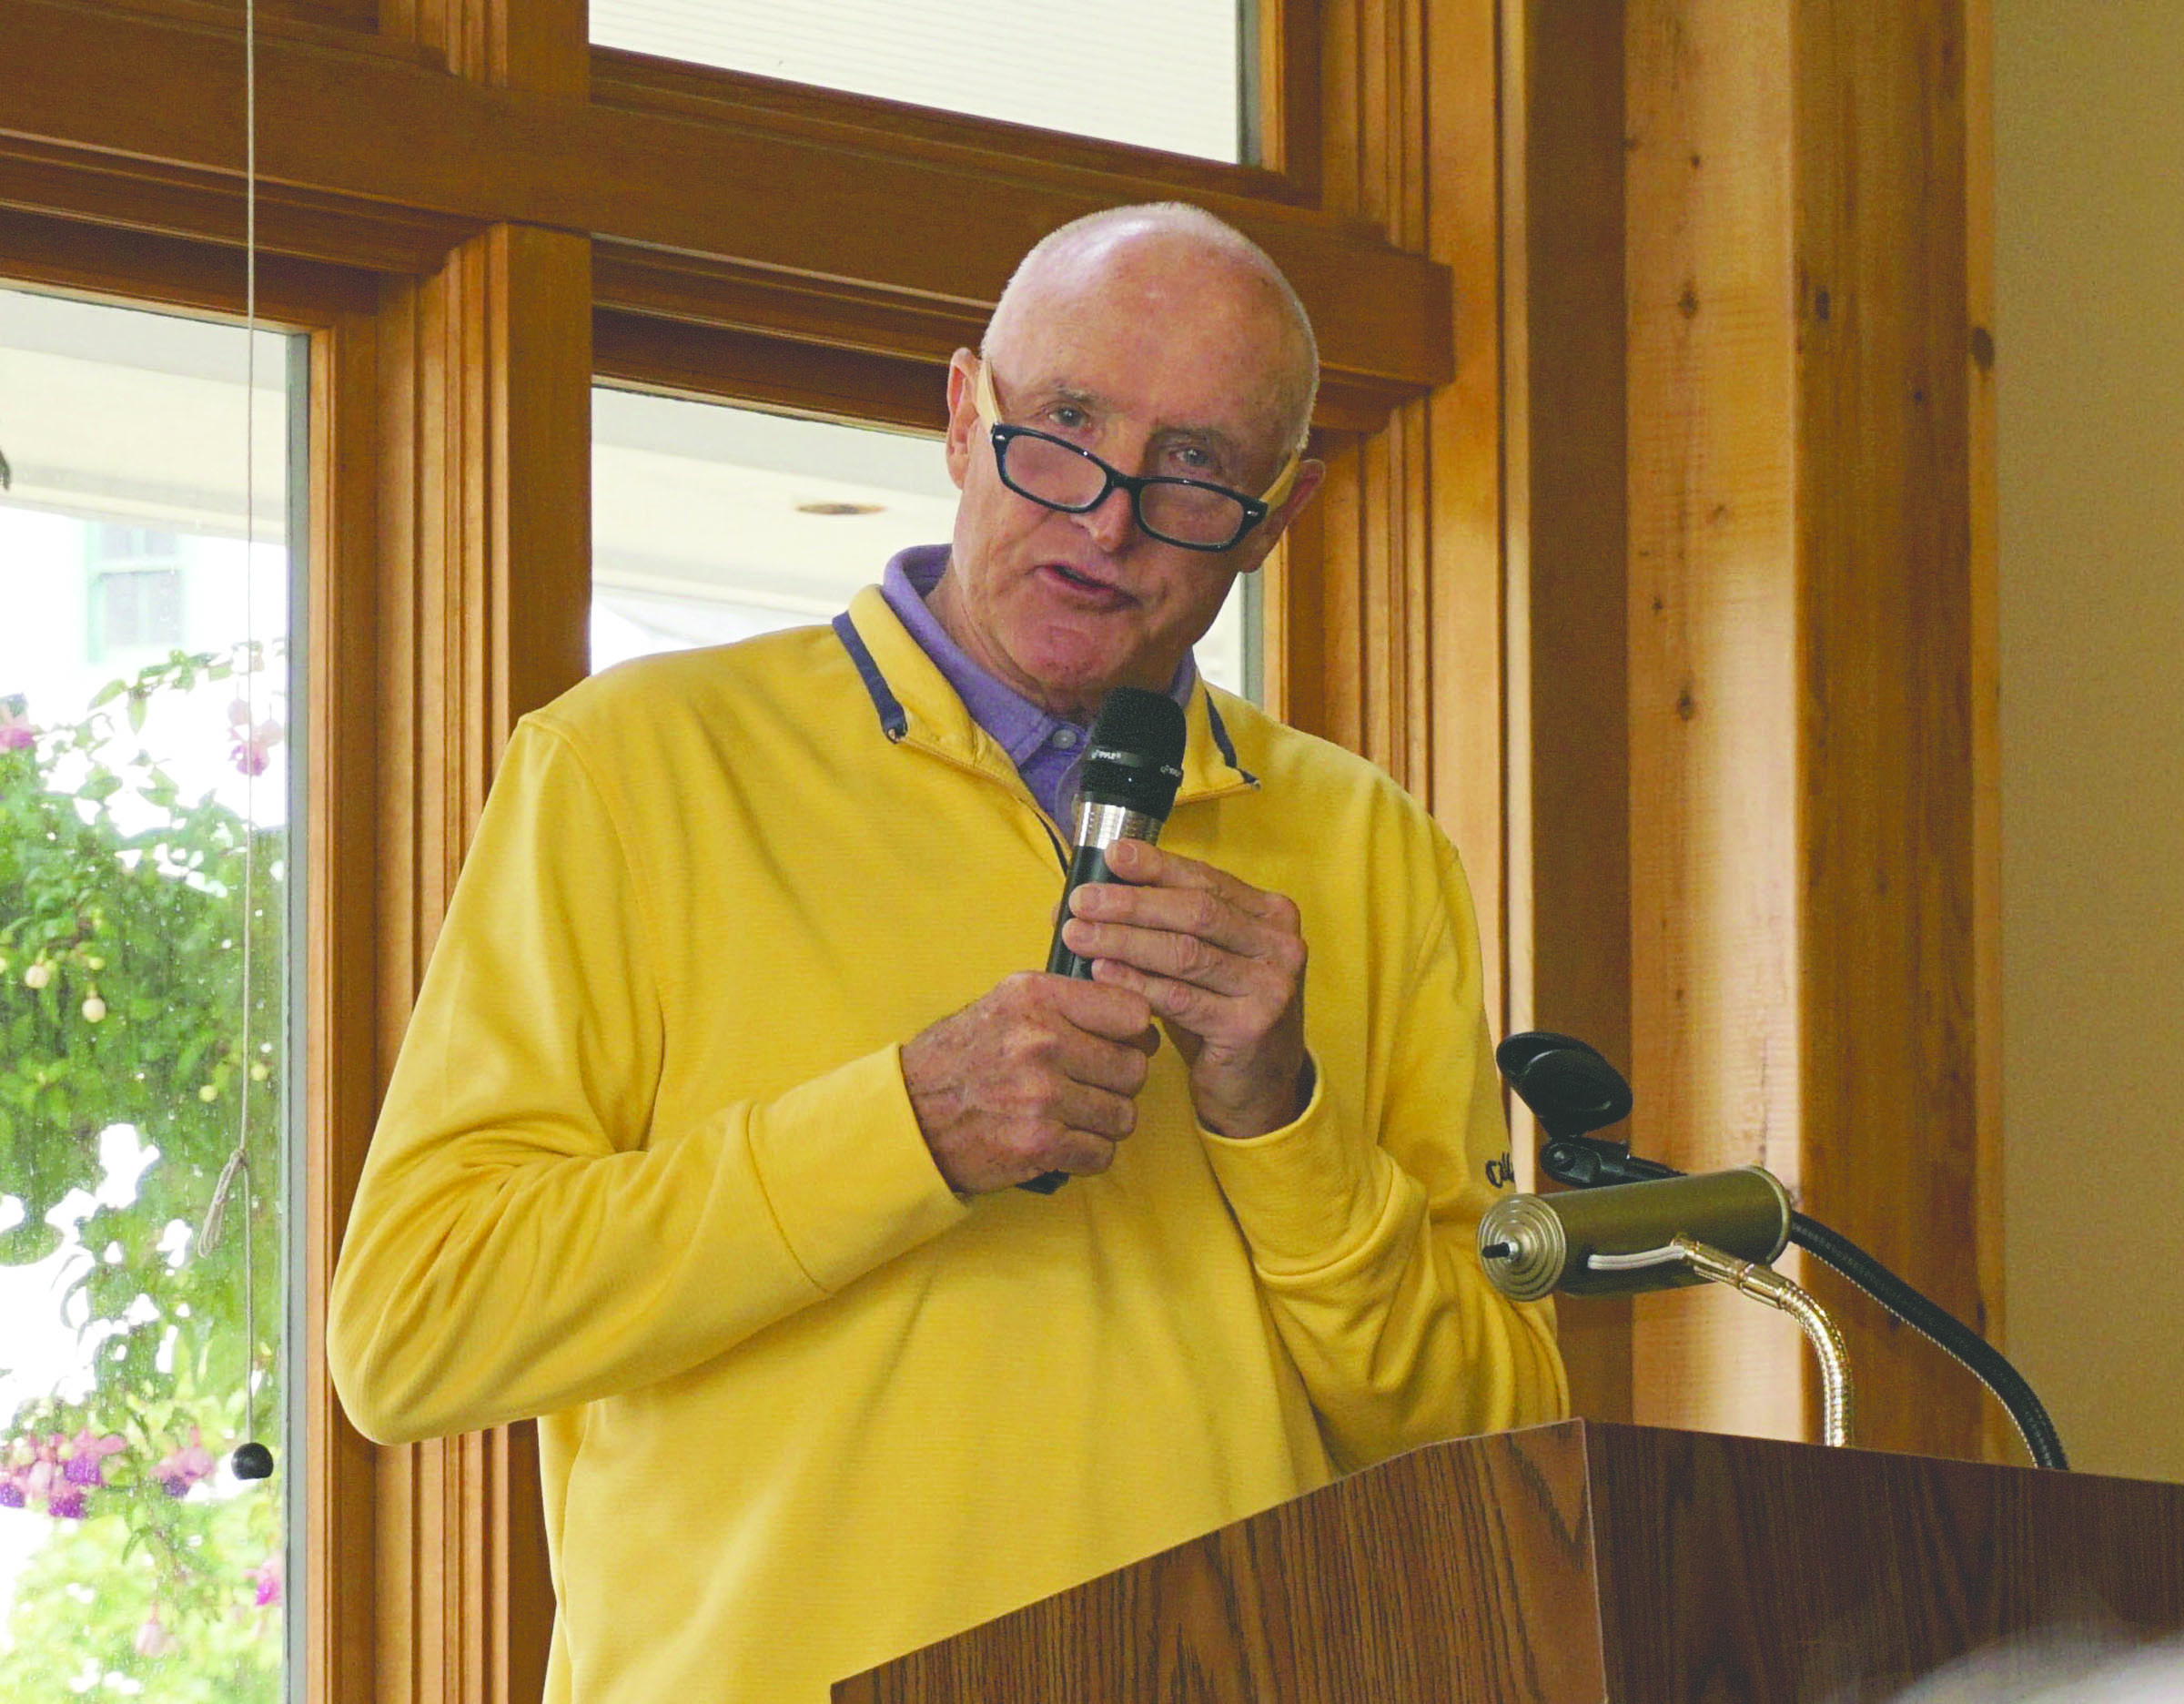 Port Ludlow Golf Course General Manager Shelton Washburn spoke Thursday about the benefits of hospice at a fundraising breakfast. (Charlie Bermant/Peninsula Daily News)